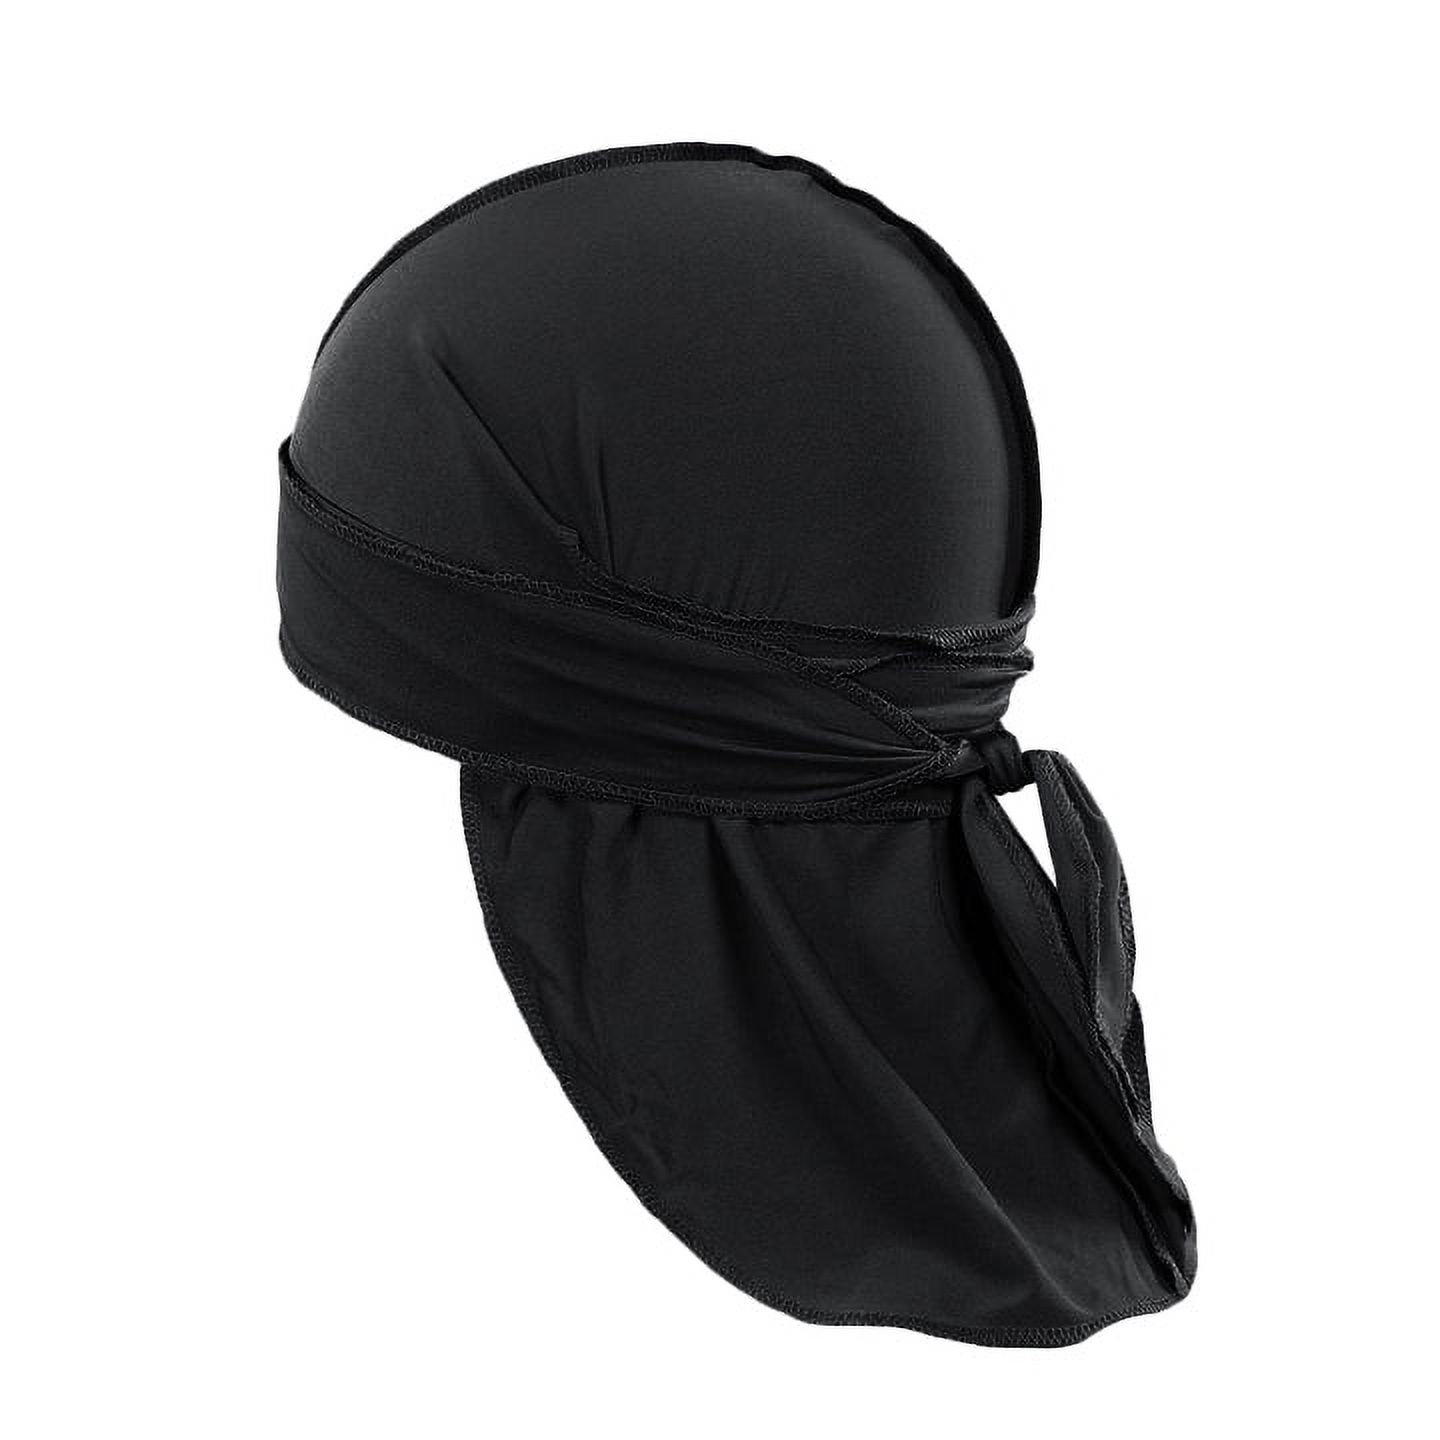 Pack of 3 Durags Headwrap for Men Waves Headscarf Bandana Doo Rag Tail (Black) - image 1 of 4